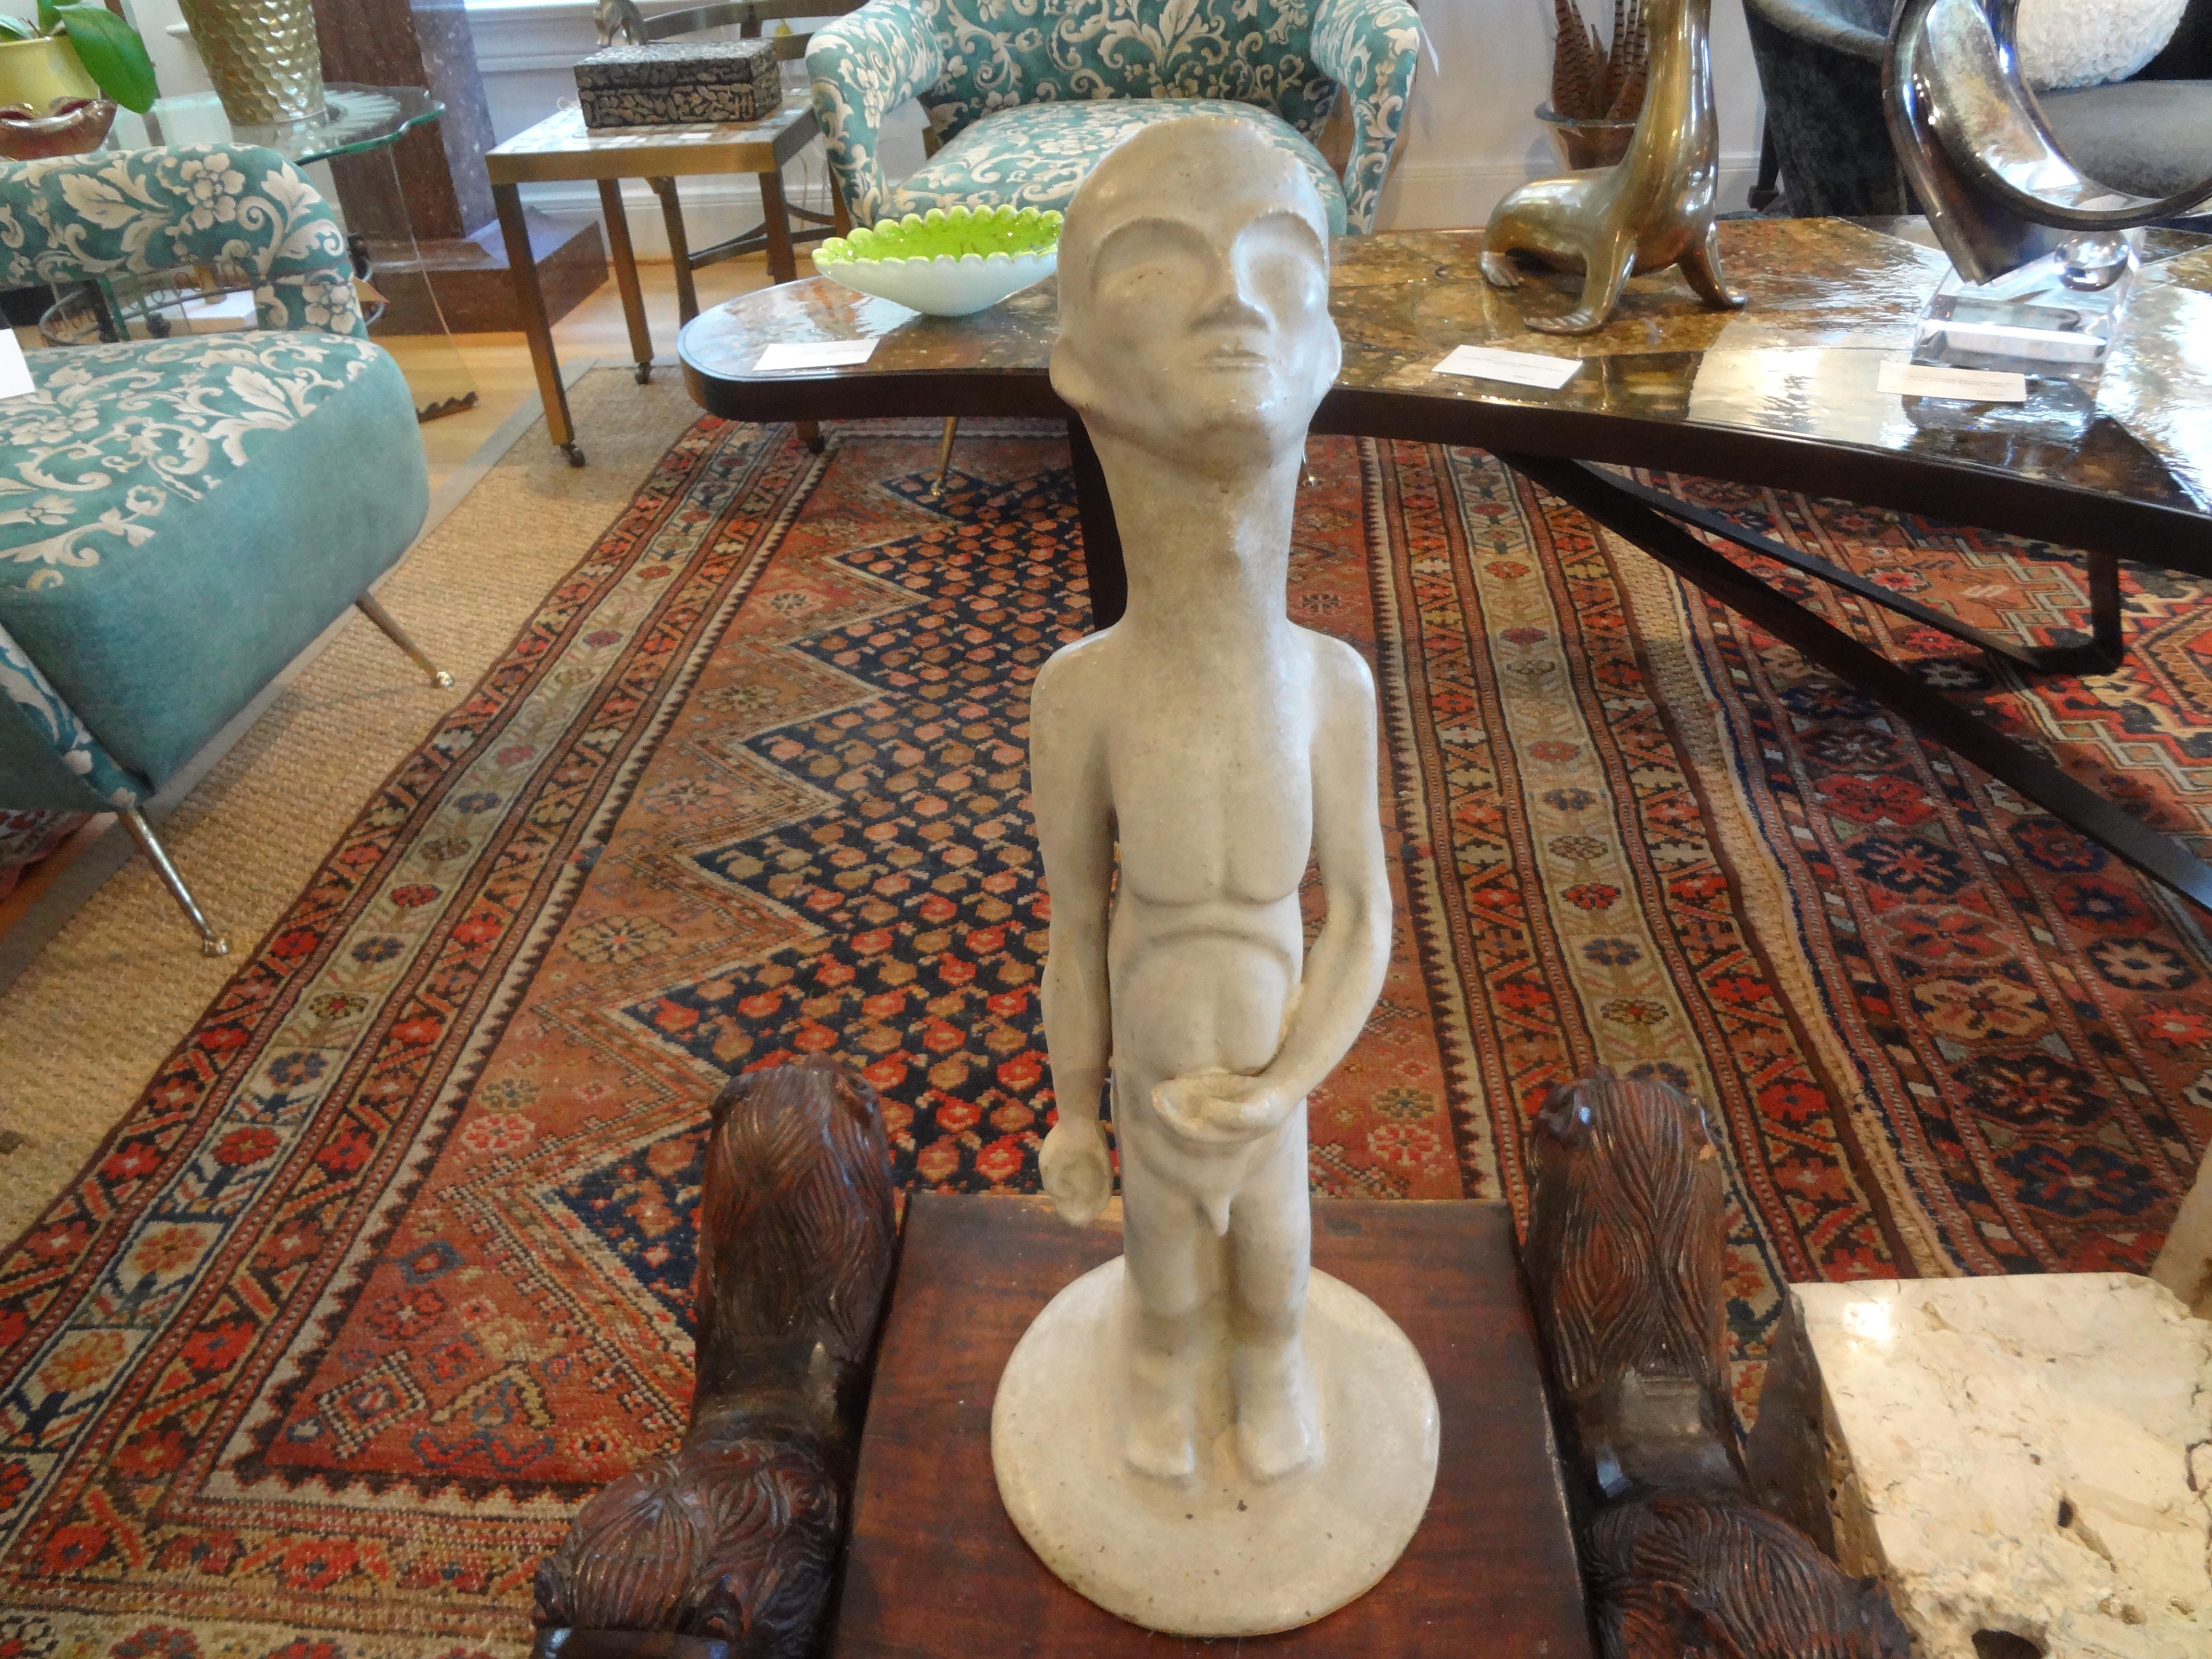 Mid-Century Modern sculpture in the manner of Amedeo Modigliani.
Fantastic Mid-Century Modern sculpture signed M.B. Mitchell. This interesting figurative sculpture of a nude male with an elongated neck is in the manner of Amedeo Modigliani.